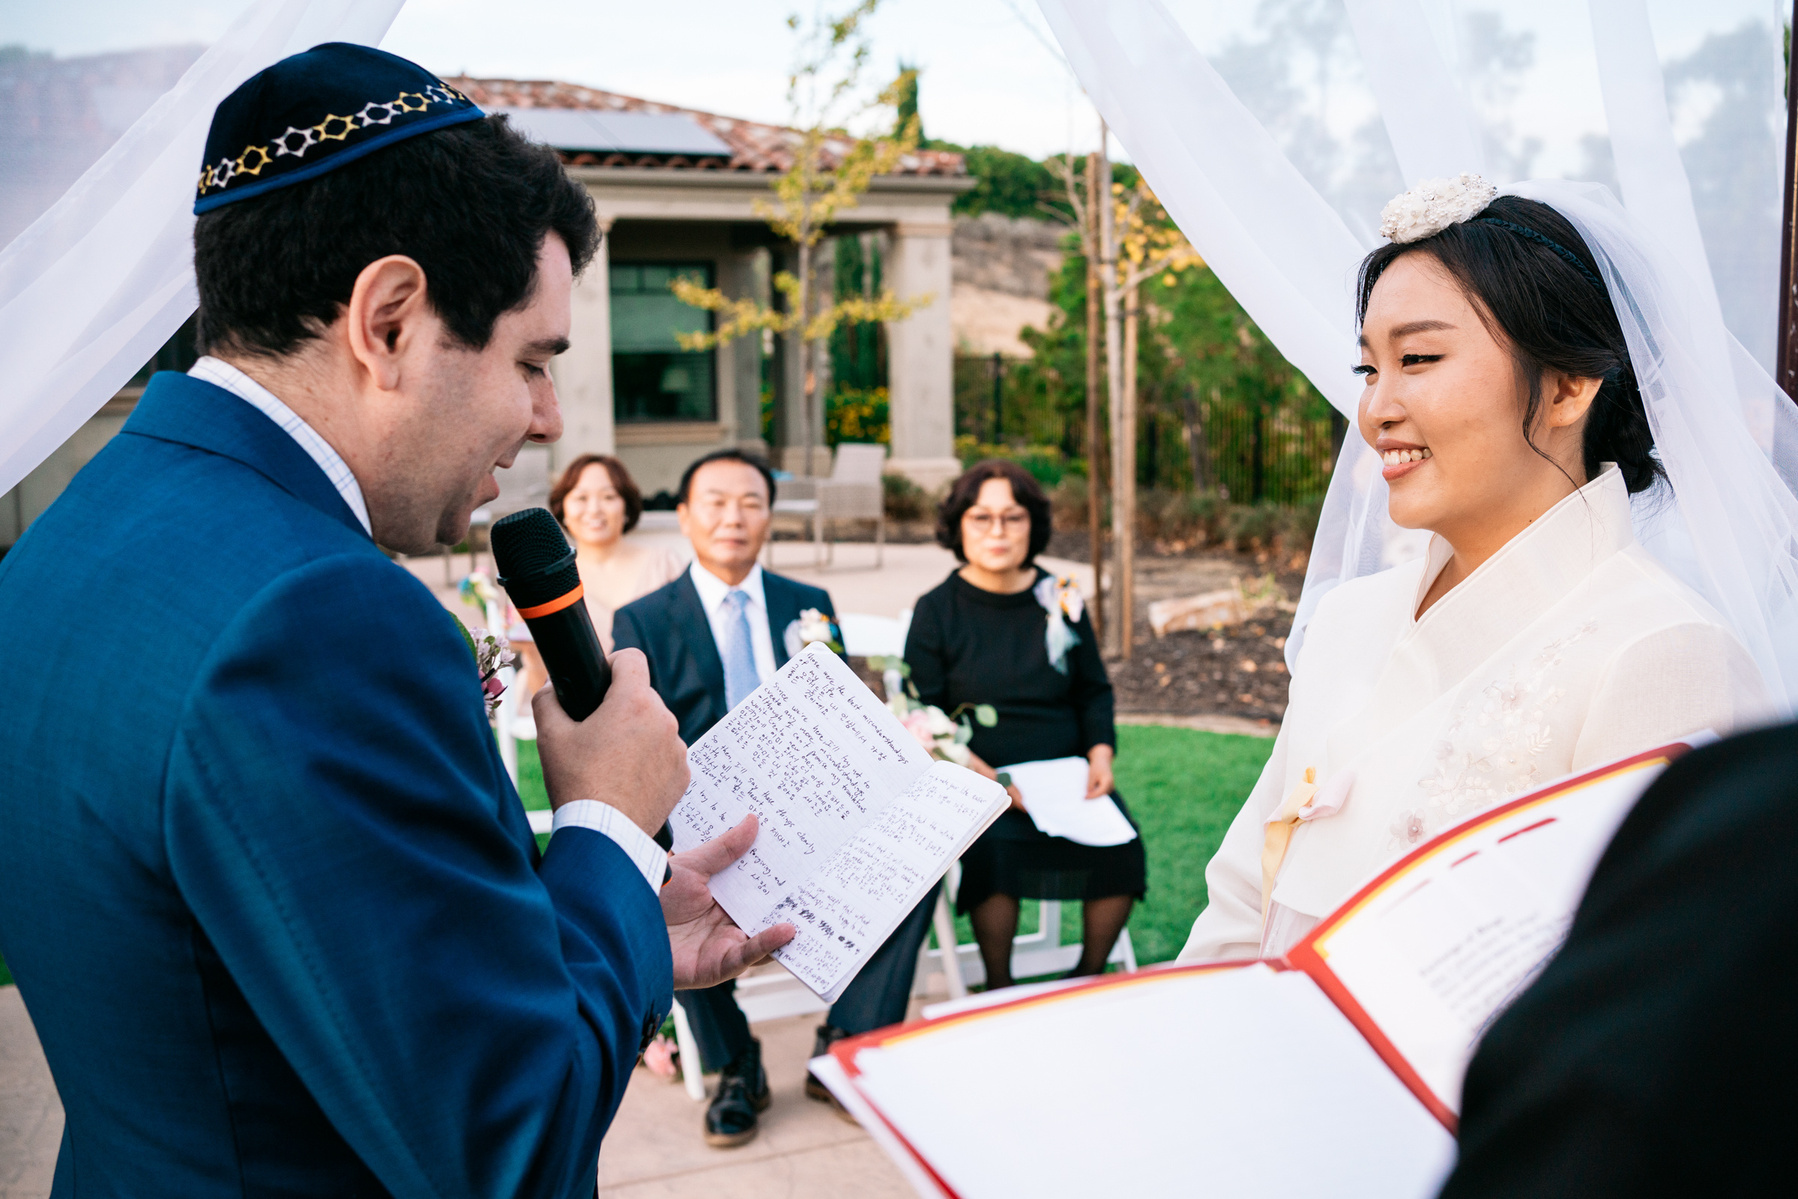 groom reads his vows in english and korean while his bride smiles